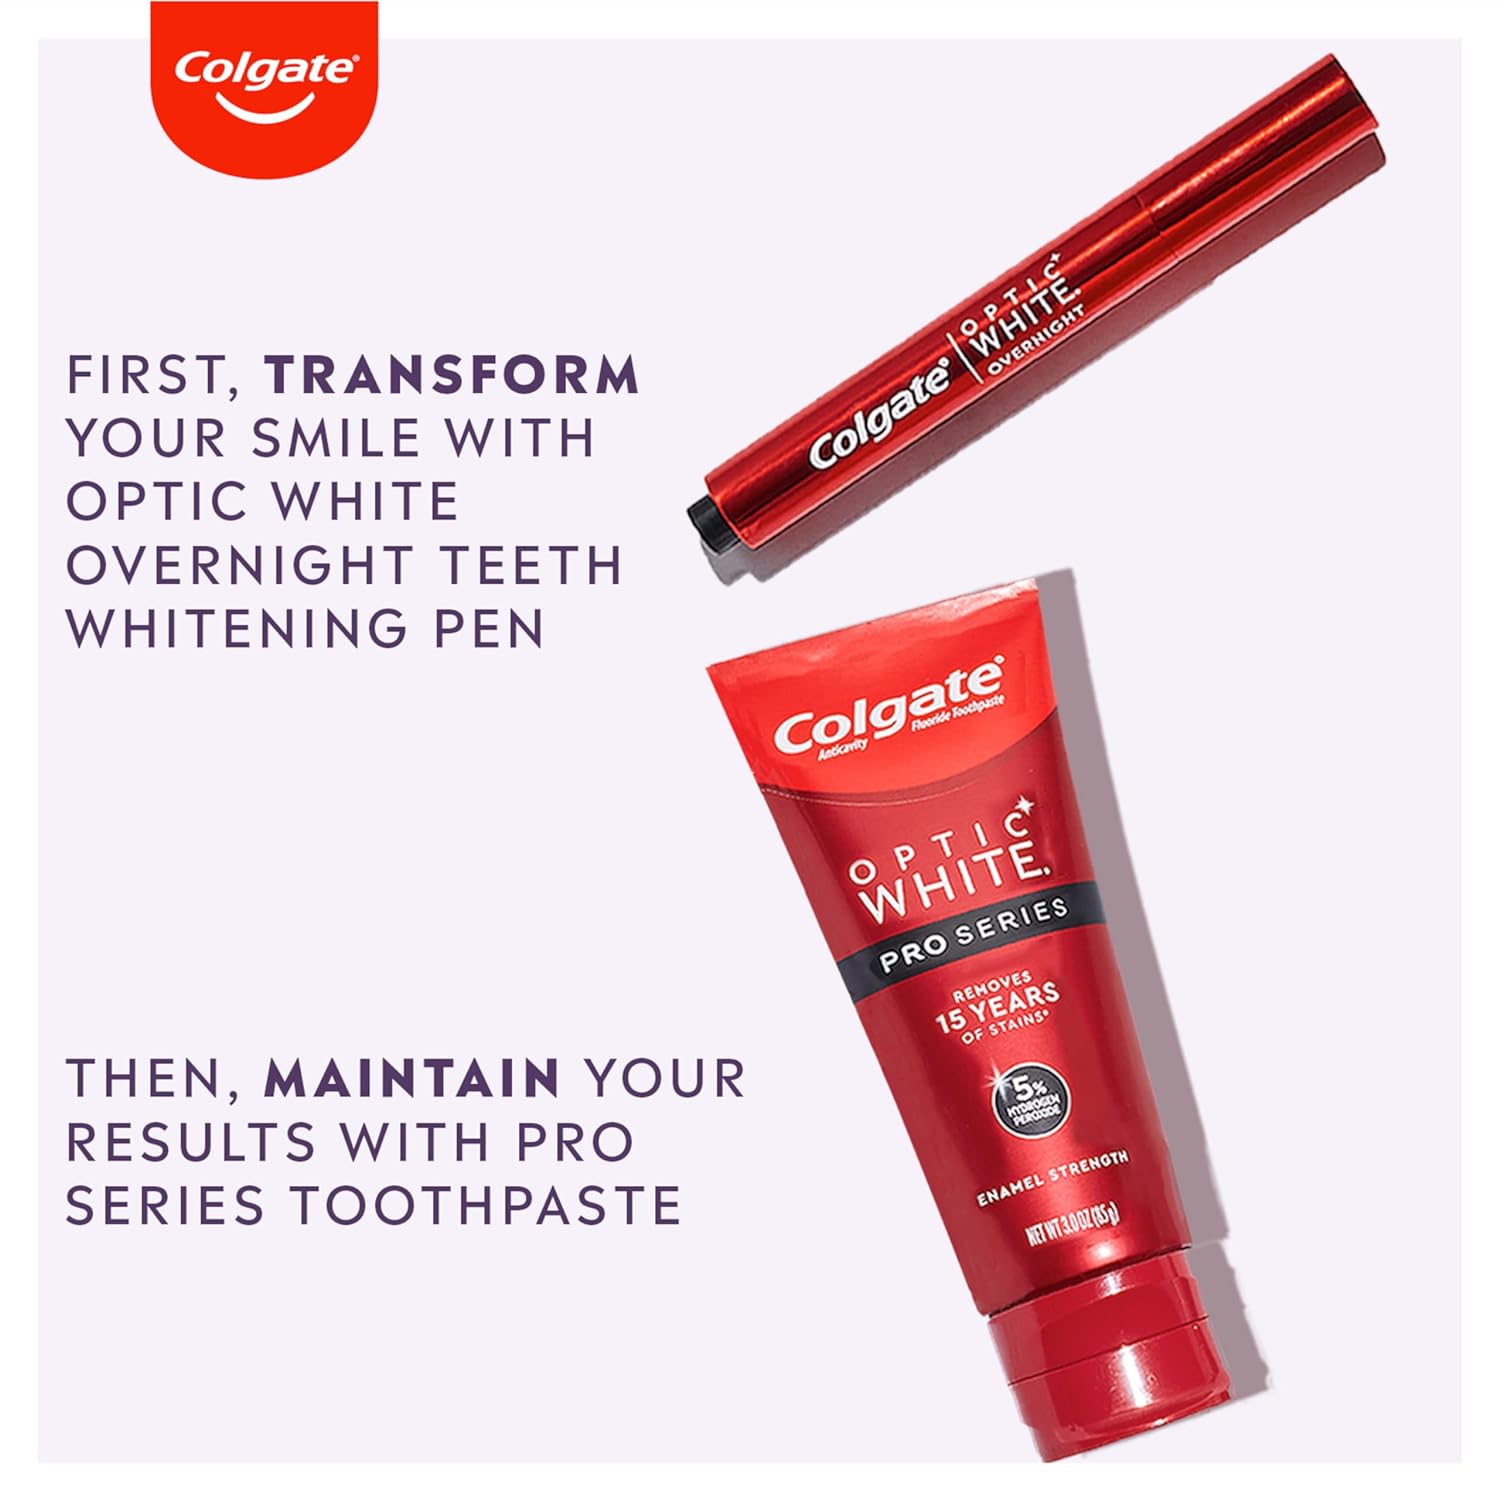 Colgate Optic White Overnight Teeth Whitening Pen, Enamel Safe and Vegan, Teeth Stain Remover to Whiten Teeth, Teeth Whitening for Sensitive Teeth, 35 Nightly Treatments Per Pen, 0.08 Oz,2 Pack : Health & Household